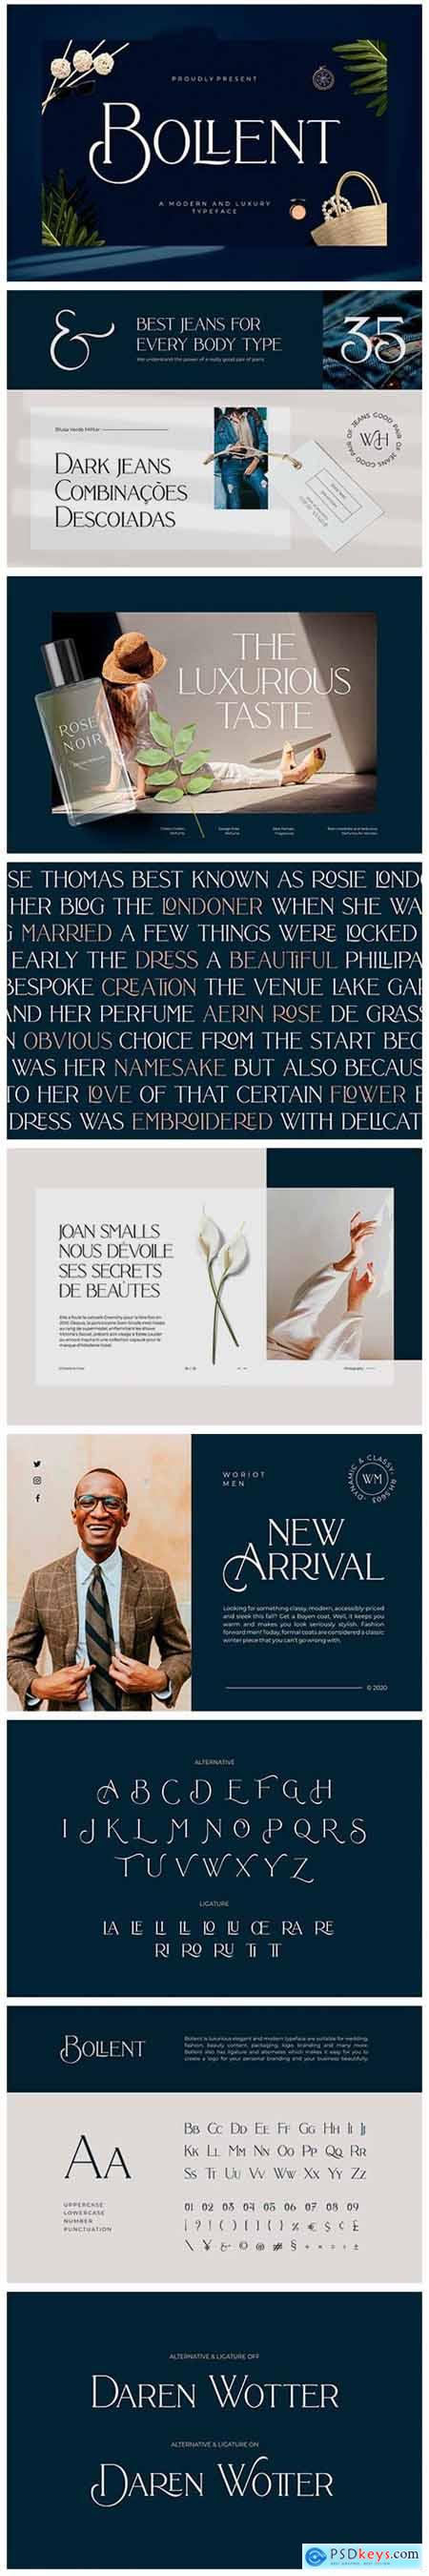 Bollent - Modern And Luxury Typeface 4657141